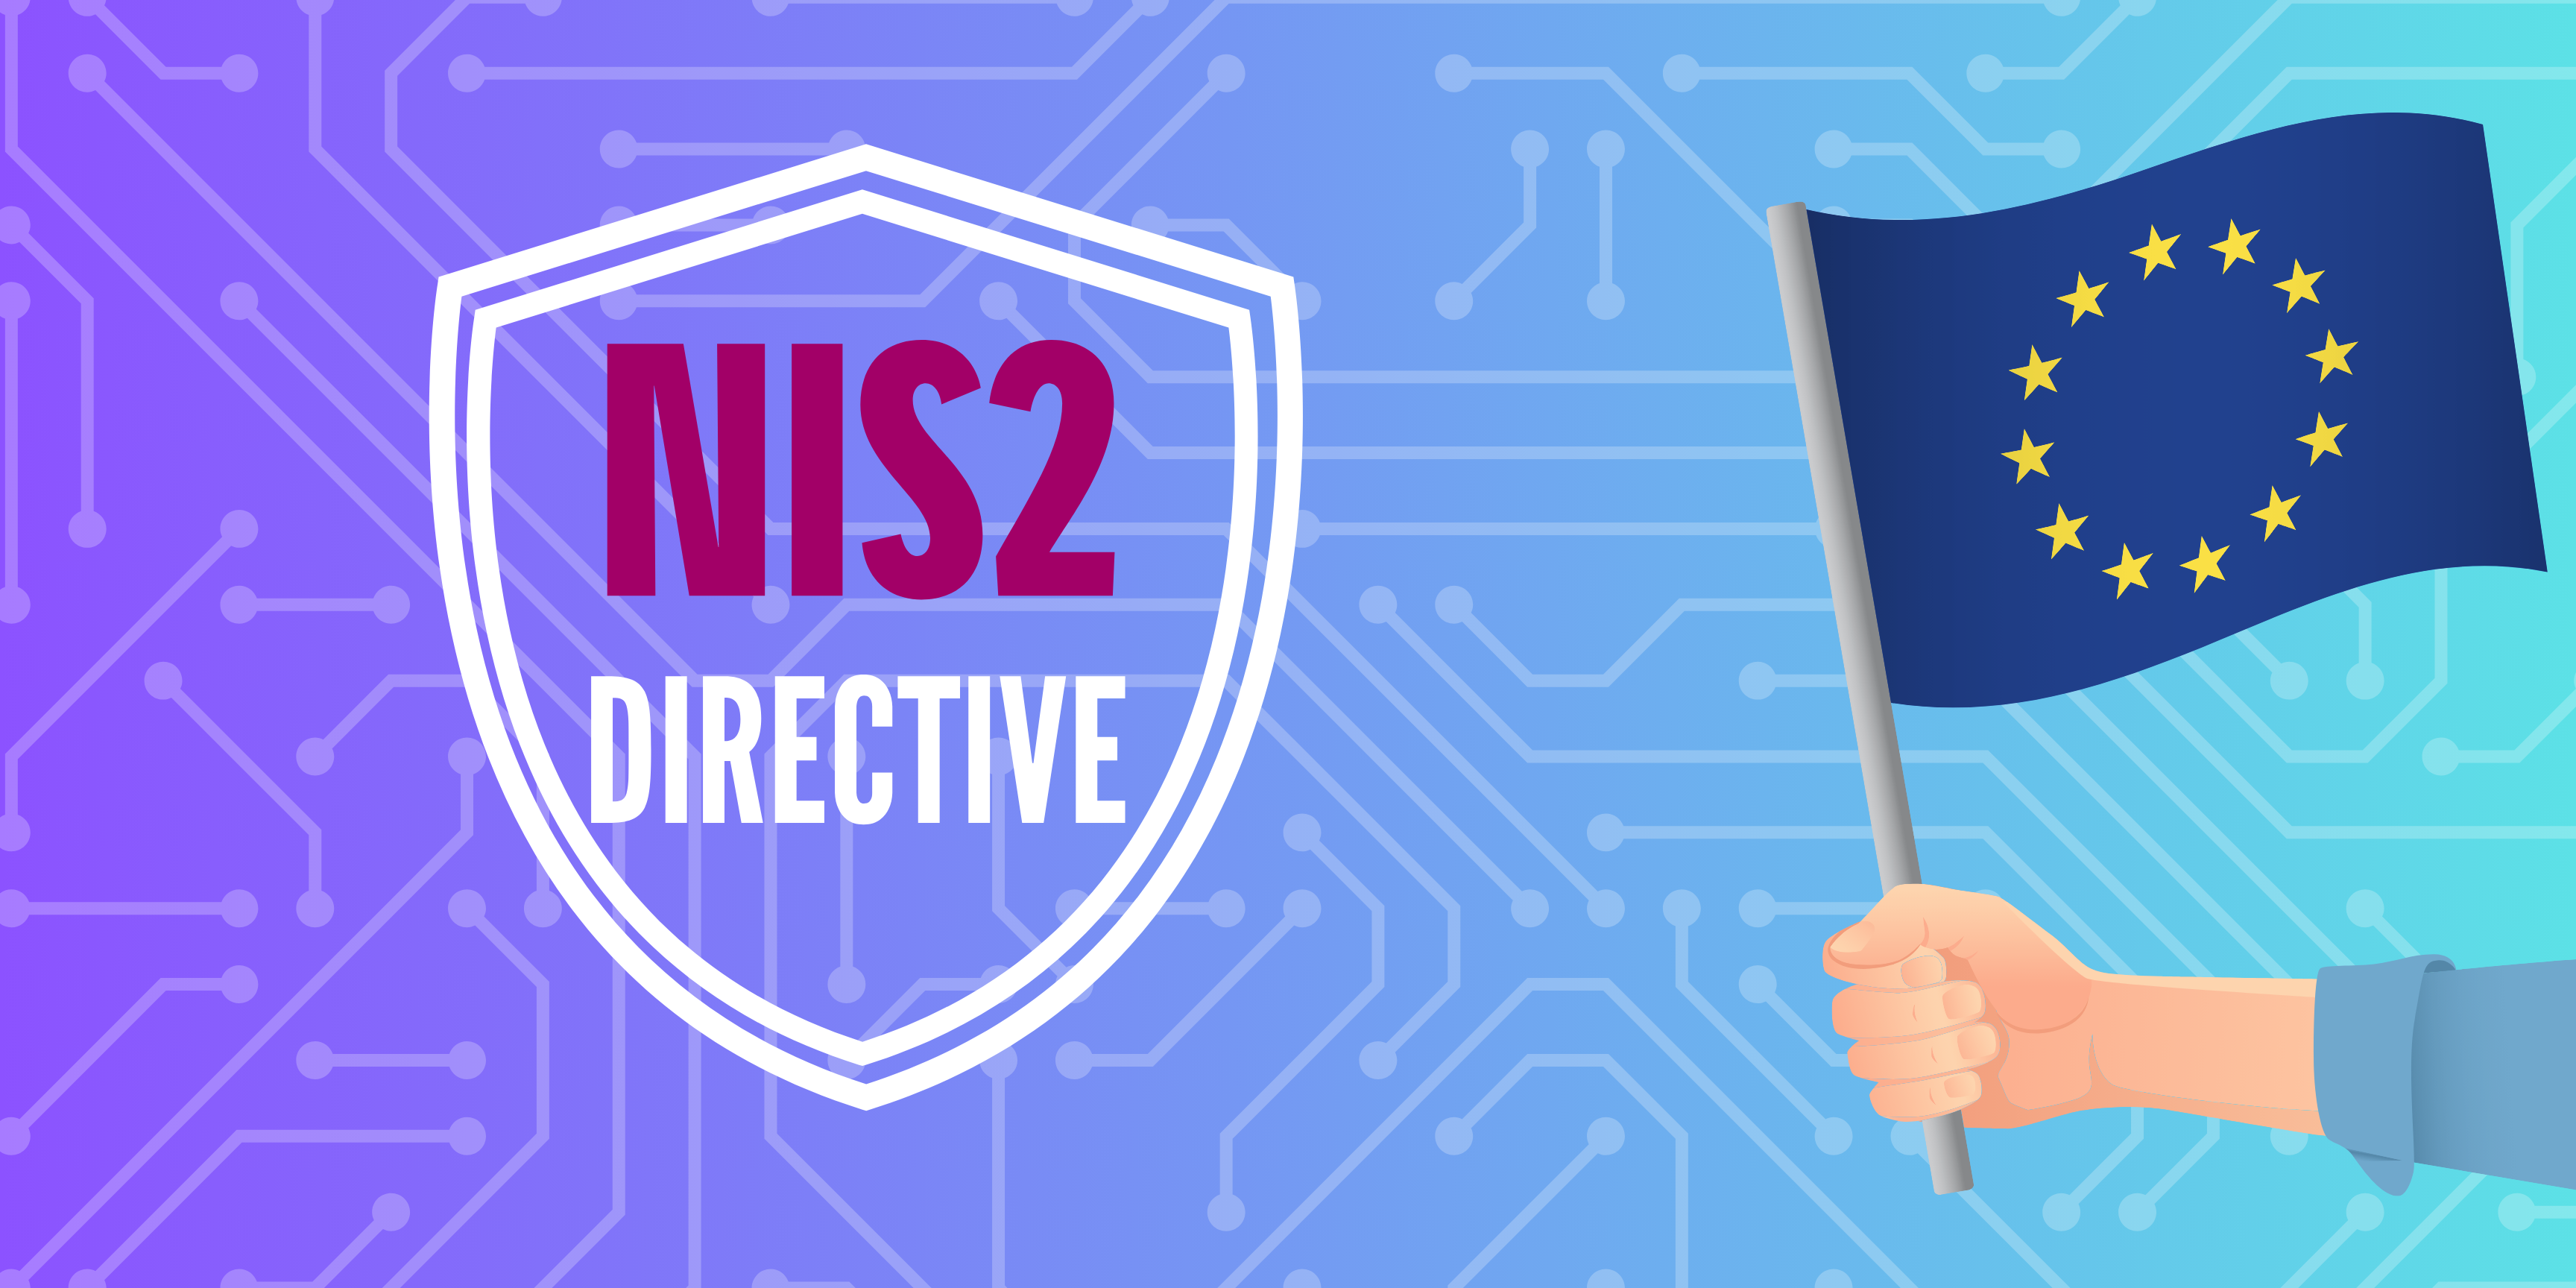 Cybersecurity NIS2